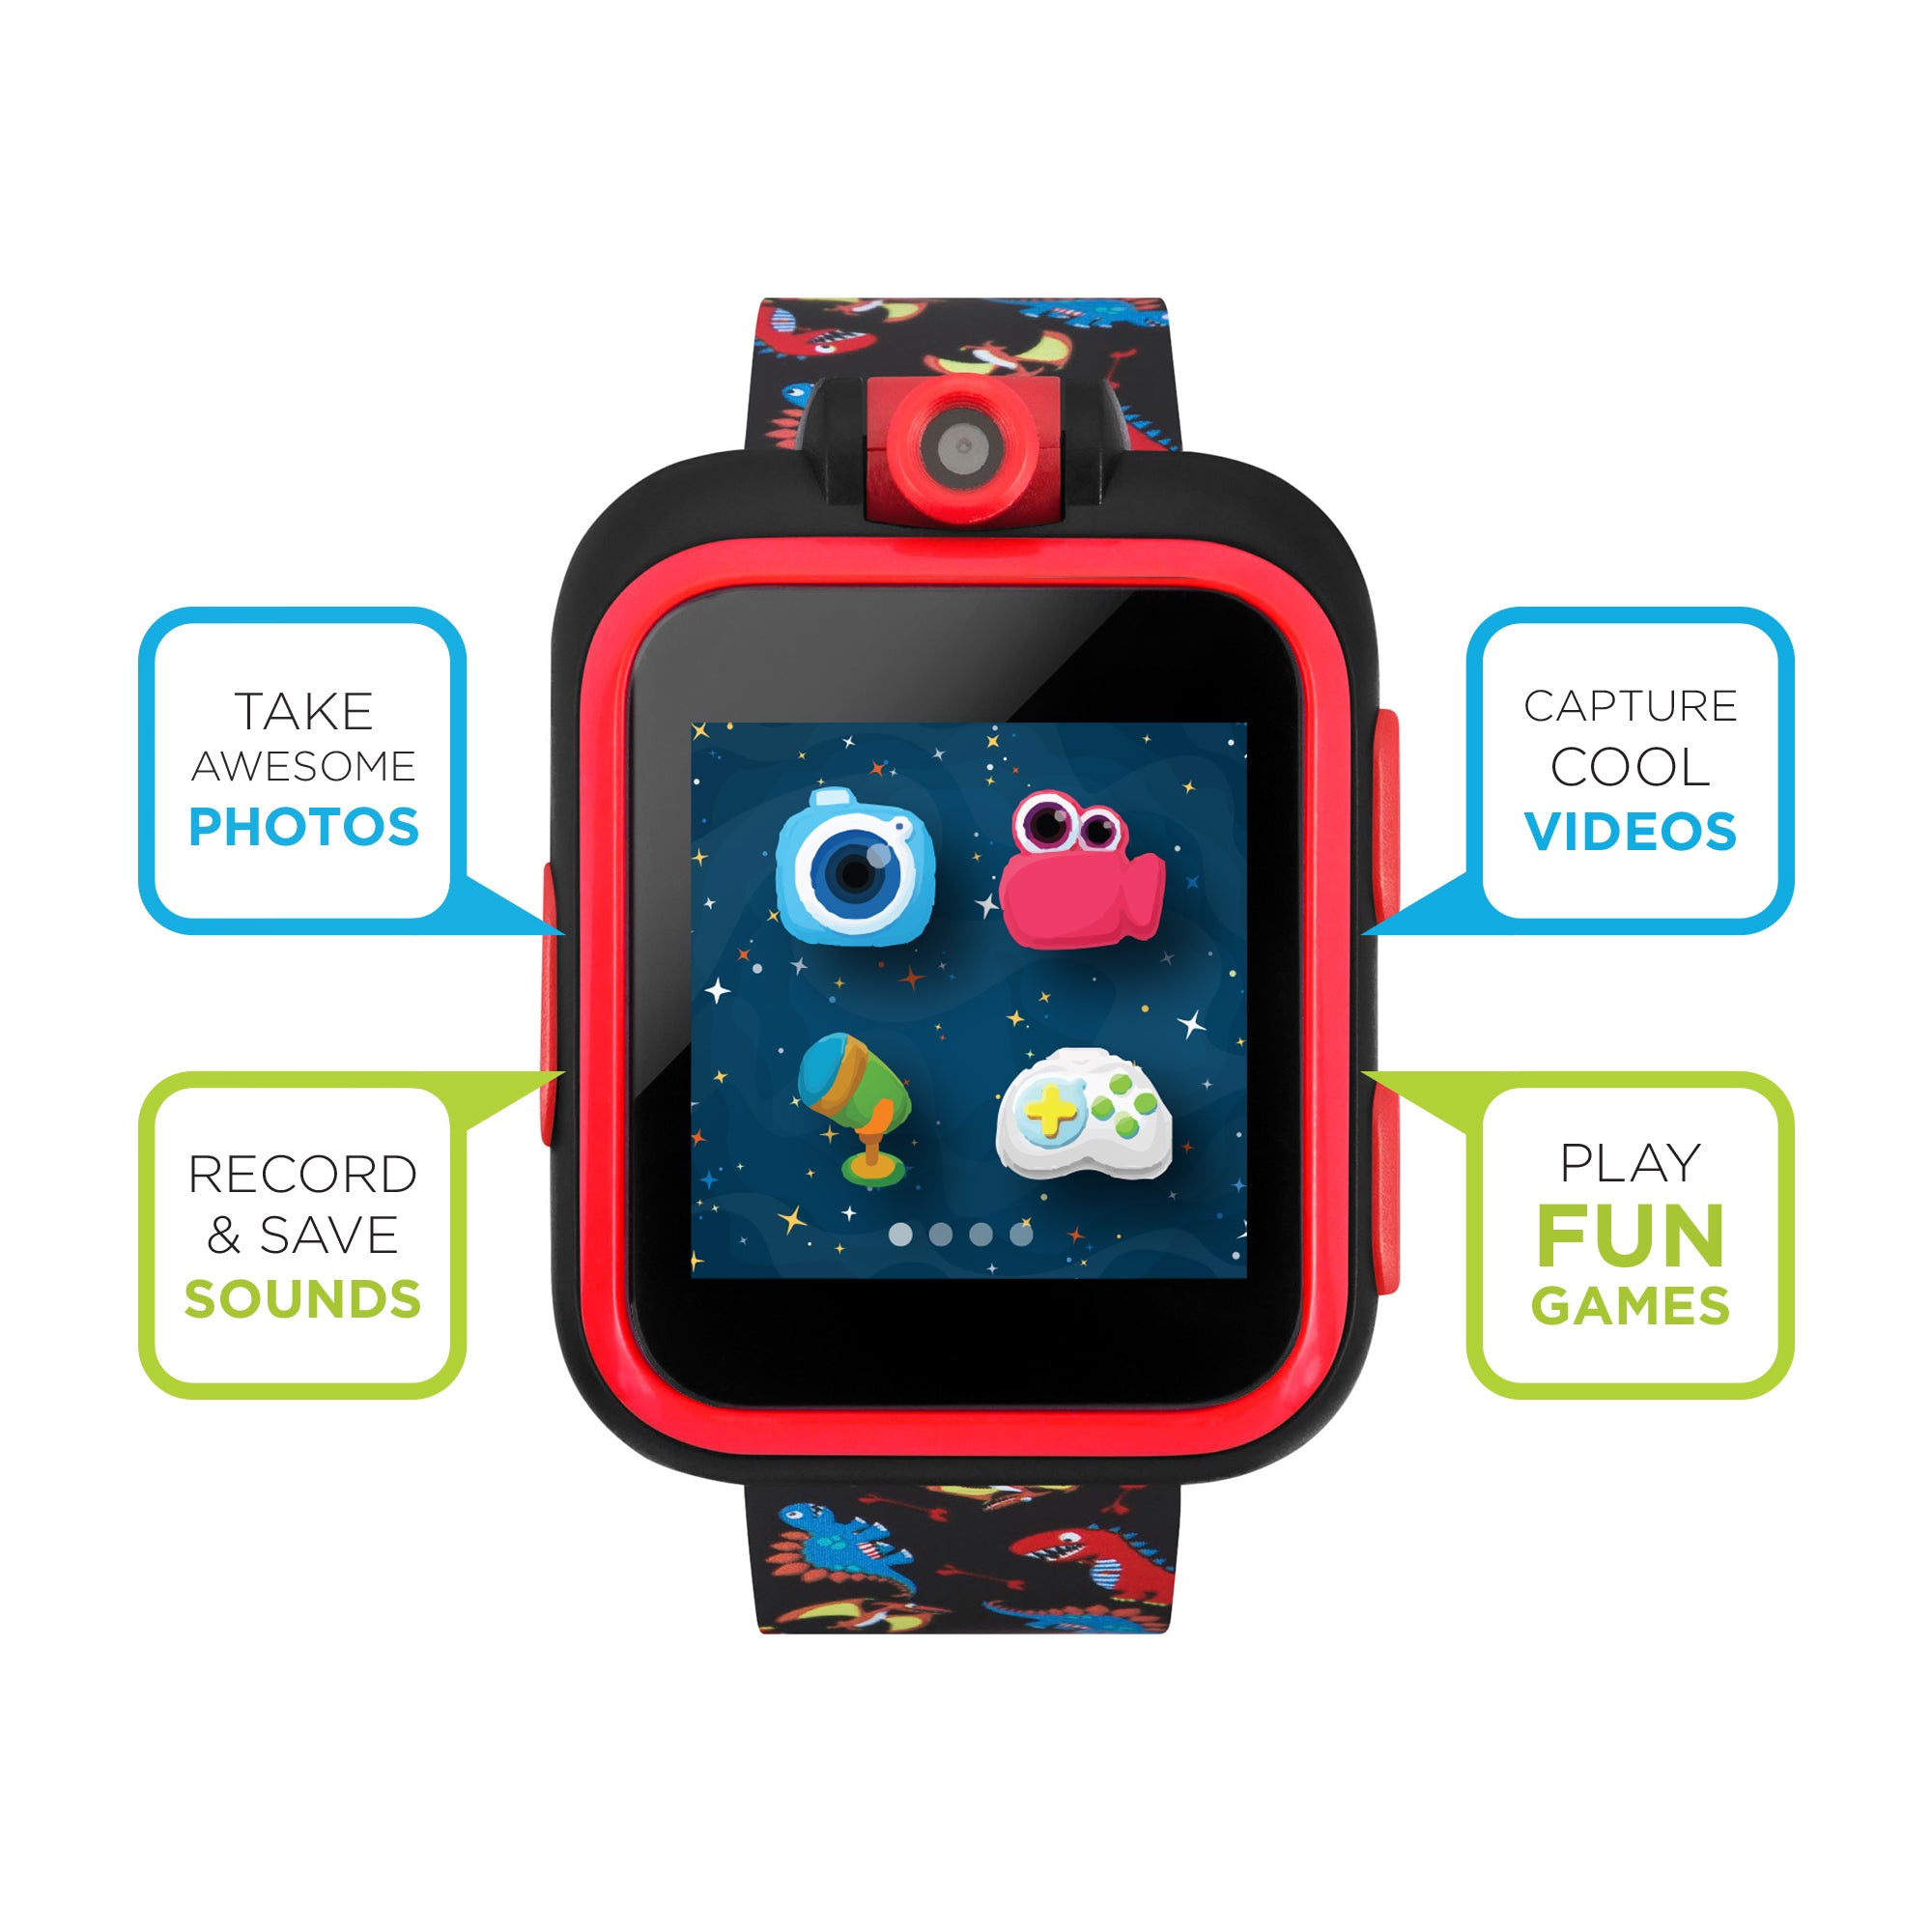 PlayZoom Smartwatch for Kids: Dinosaur Print affordable smart watch